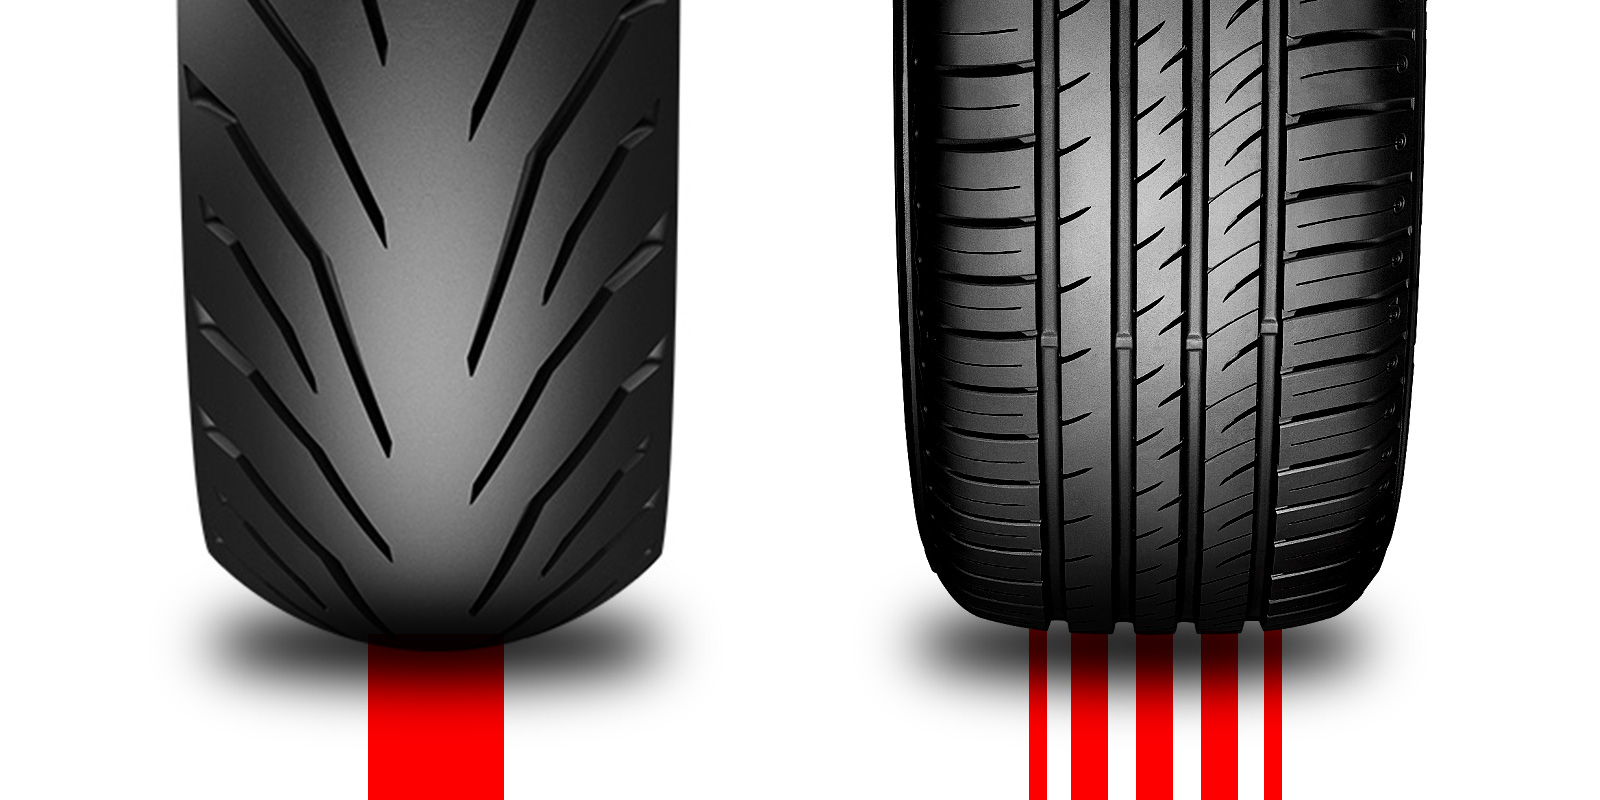 Diagram showing contact patches of motorcycle and car tyre when vertical